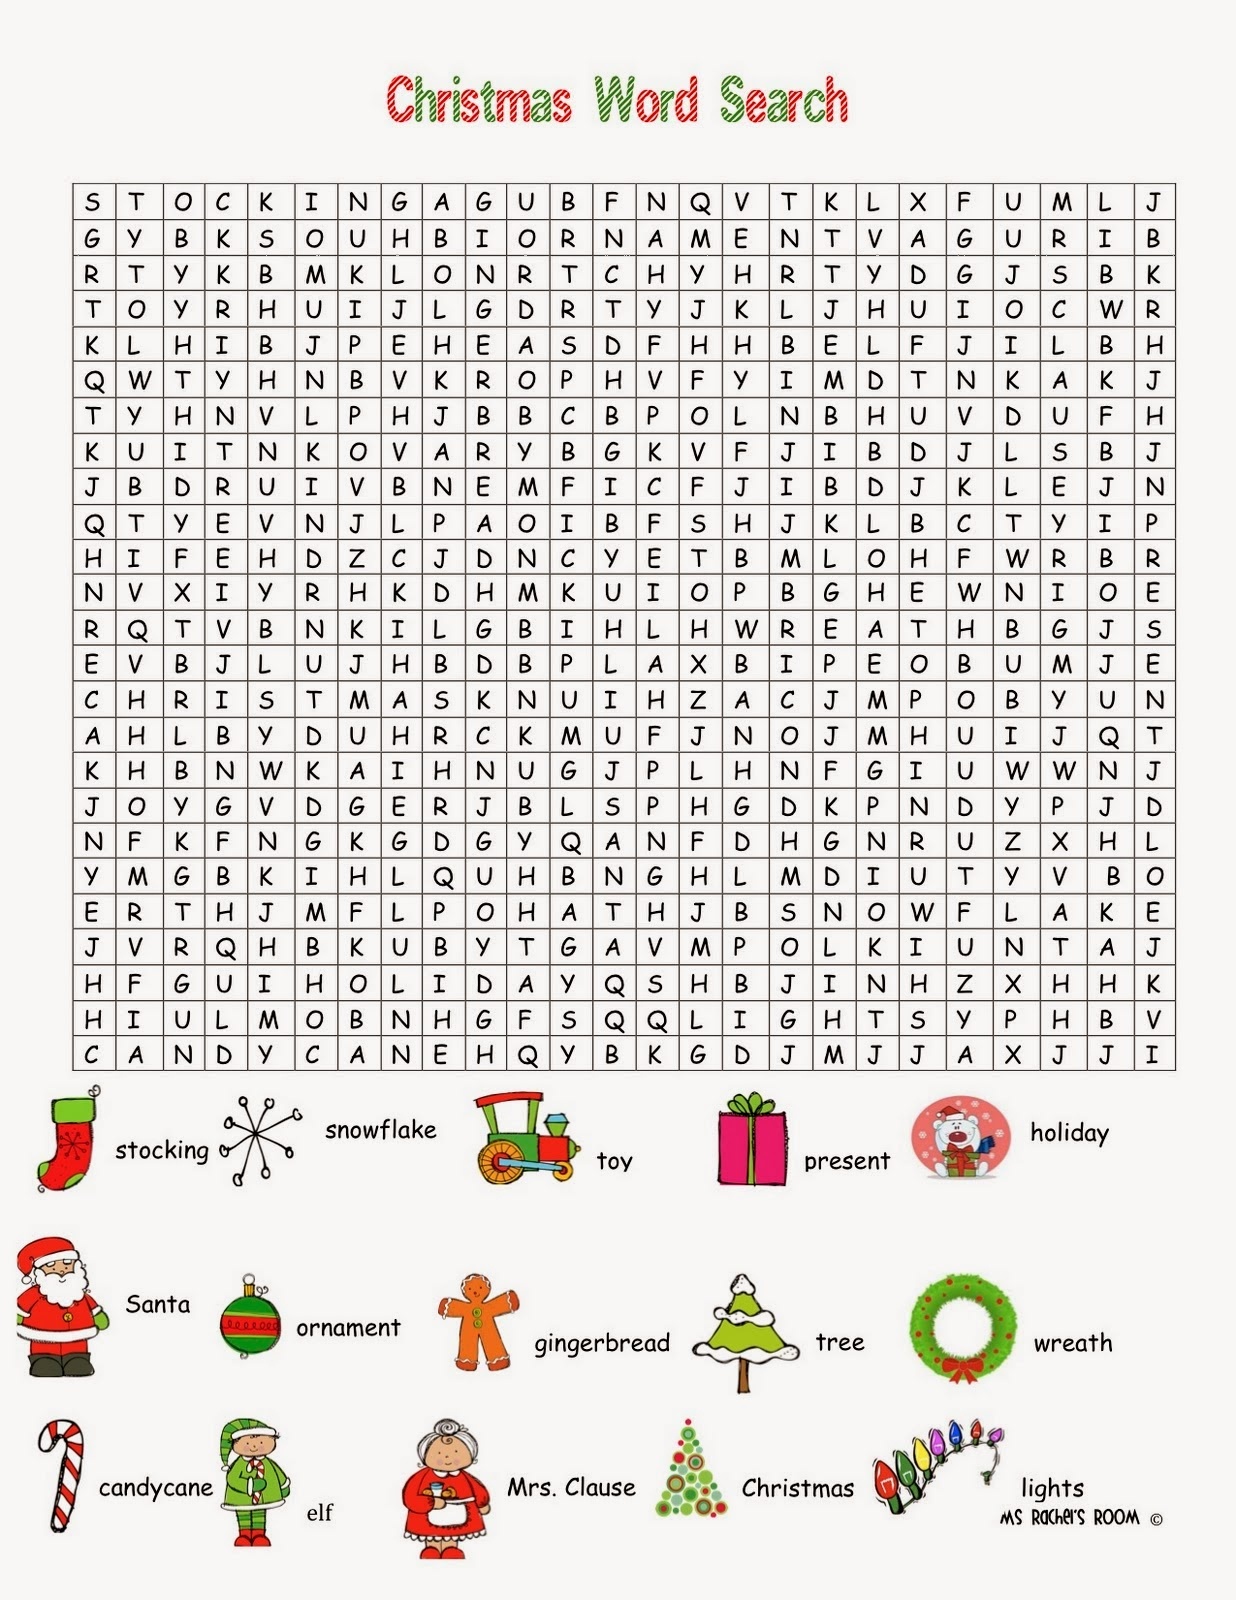 36 Printable Christmas Word Search Puzzles | Kittybabylove - Free Printable Christmas Word Search Pages